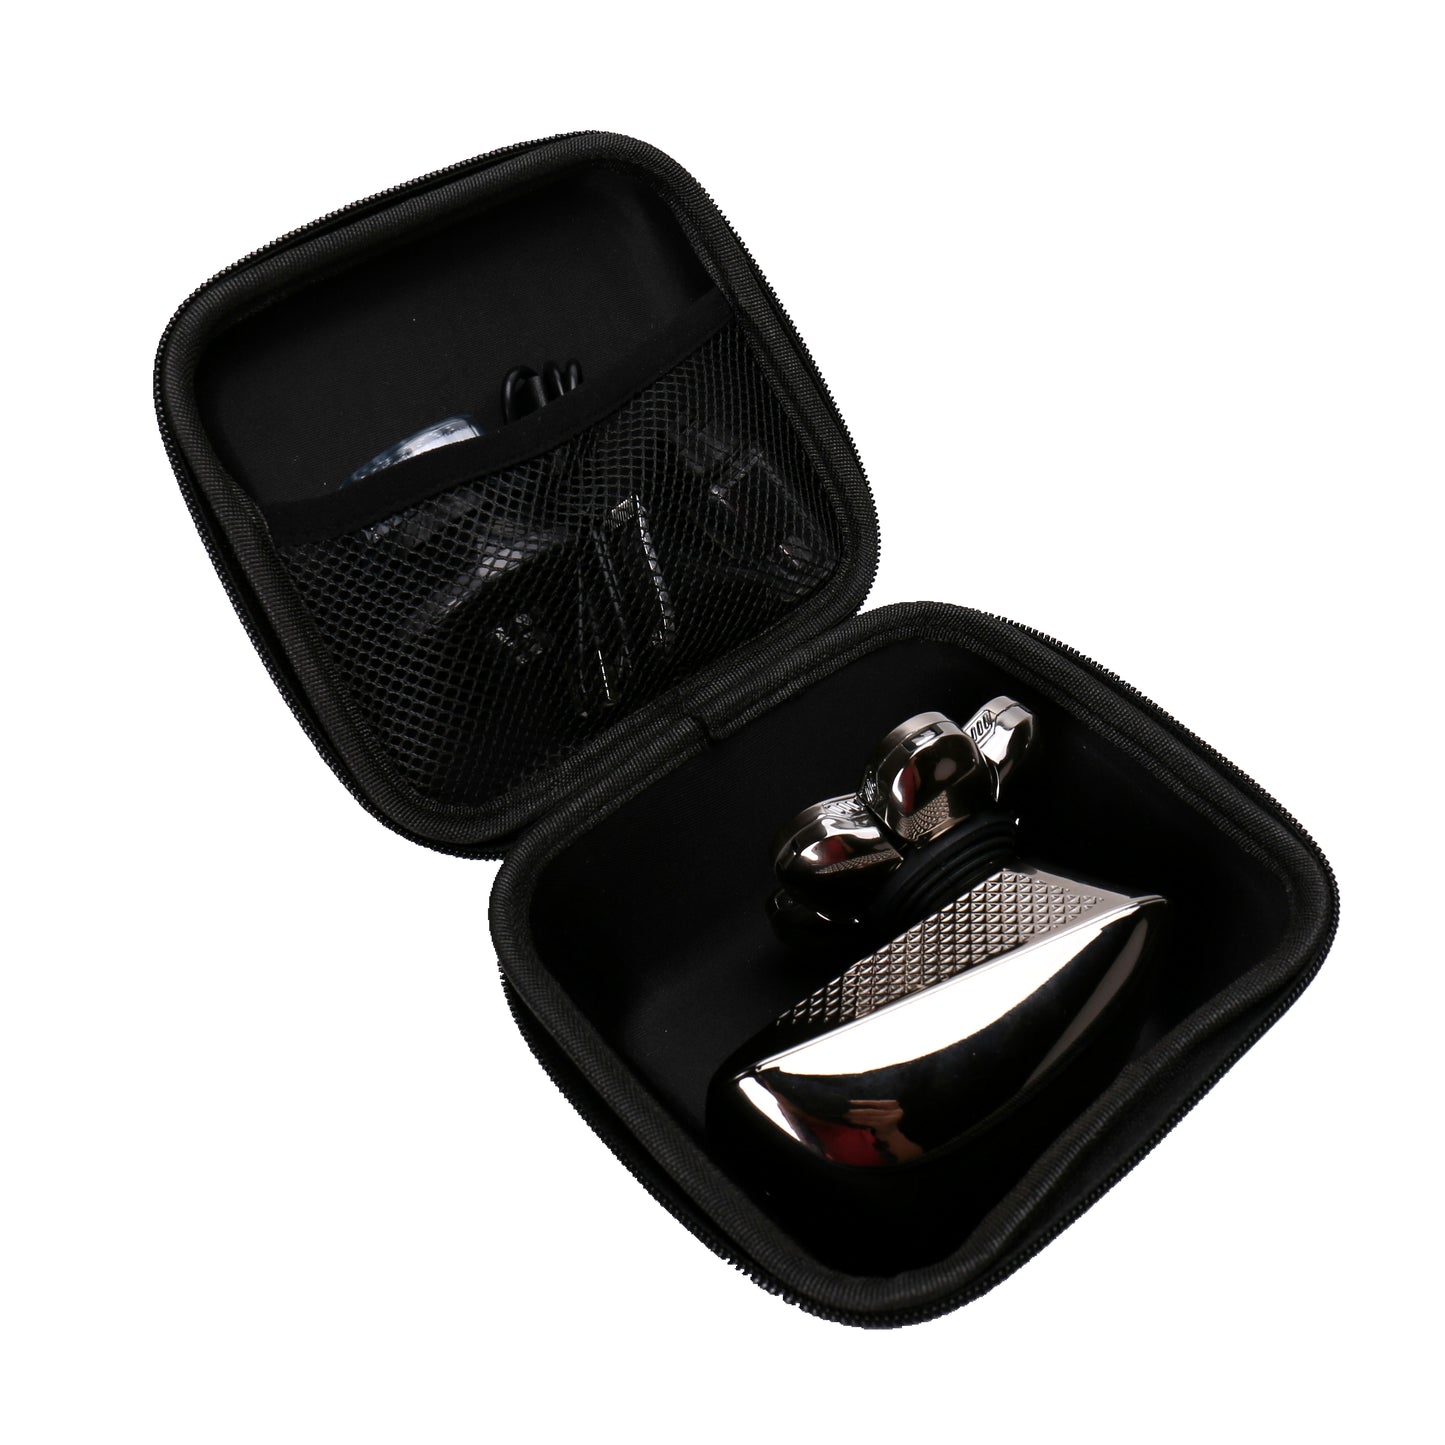 AidallsWellup Leather Case for Head Shaver, for Men's 5-in-1 Electric Head Shaver, Universal, Black Case